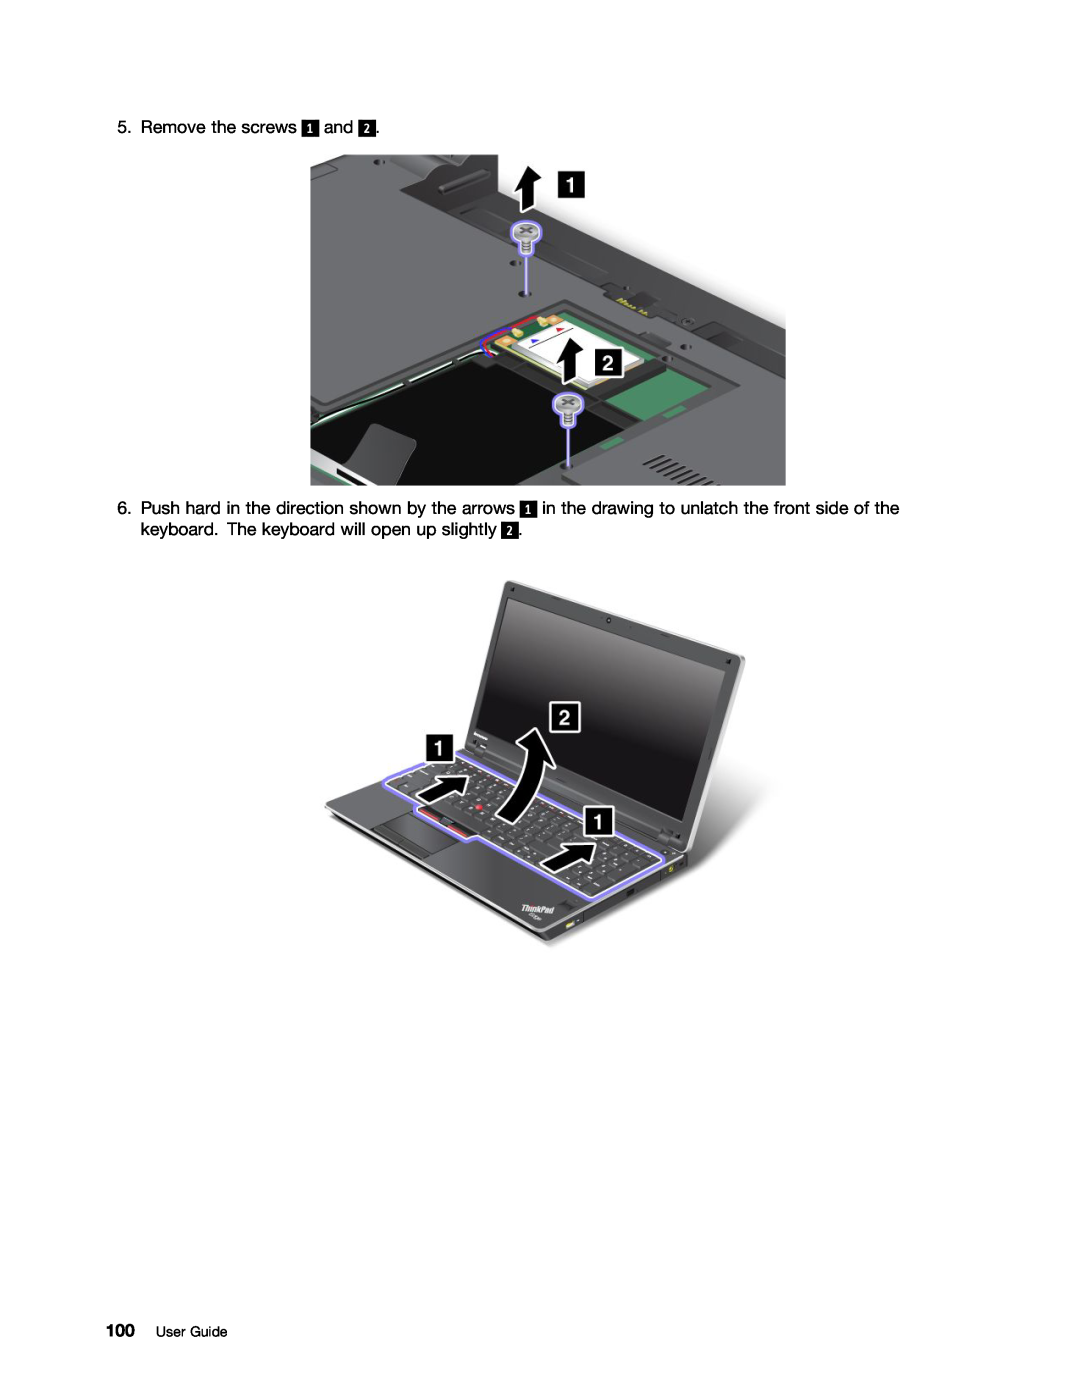 Lenovo E420, E520, 114155U manual Remove the screws 1 and, in the drawing to unlatch the front side of the, User Guide 